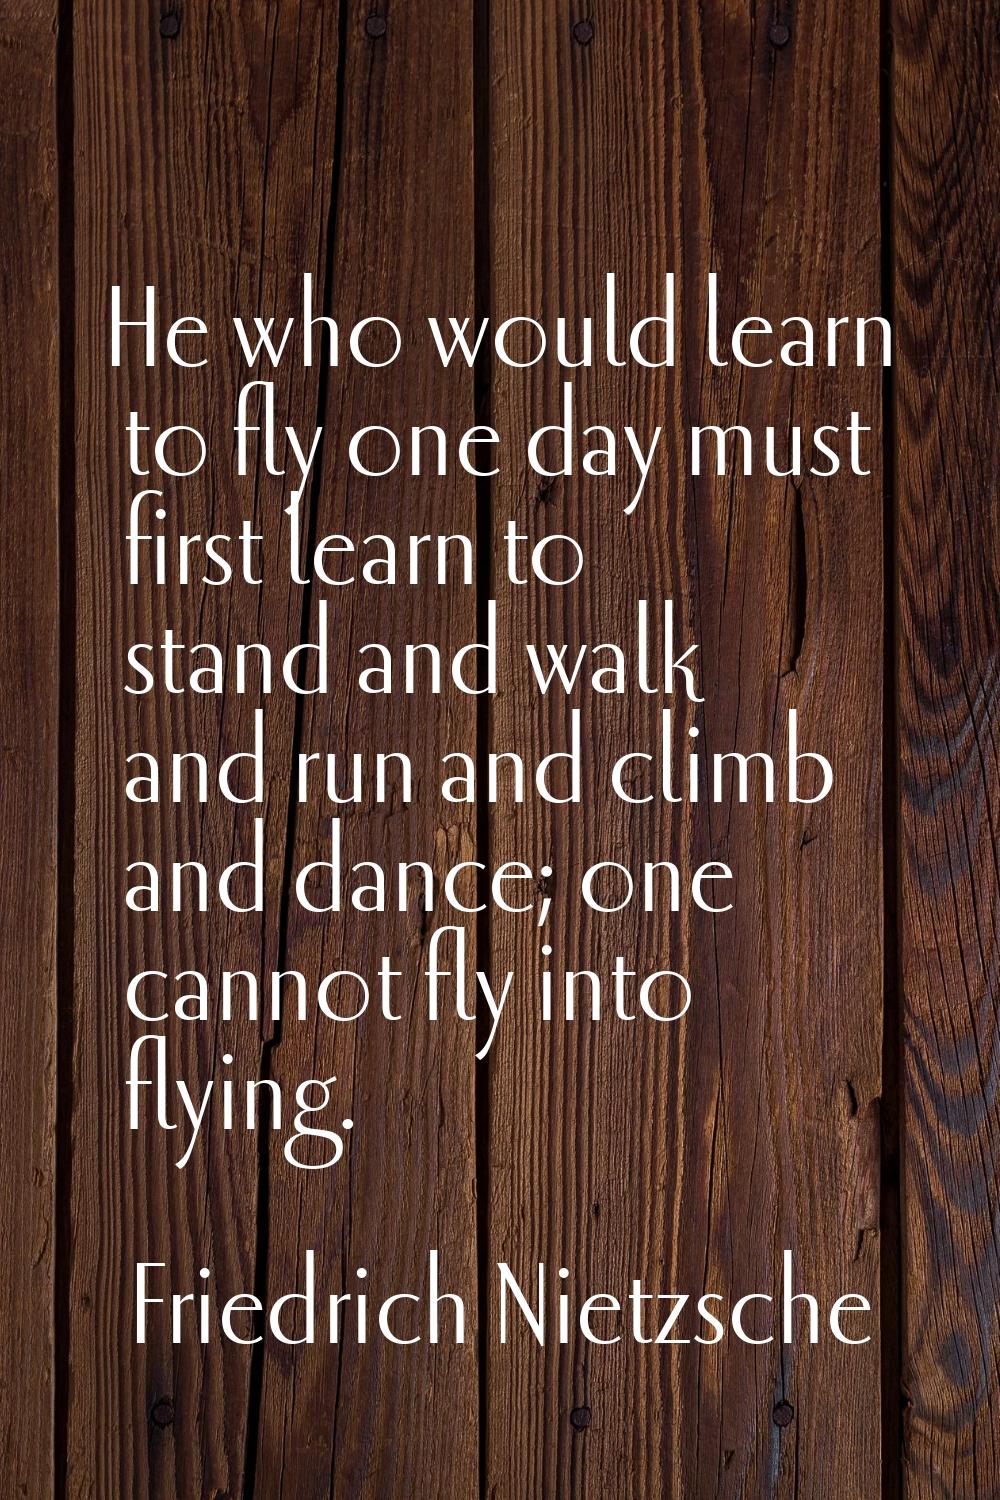 He who would learn to fly one day must first learn to stand and walk and run and climb and dance; o